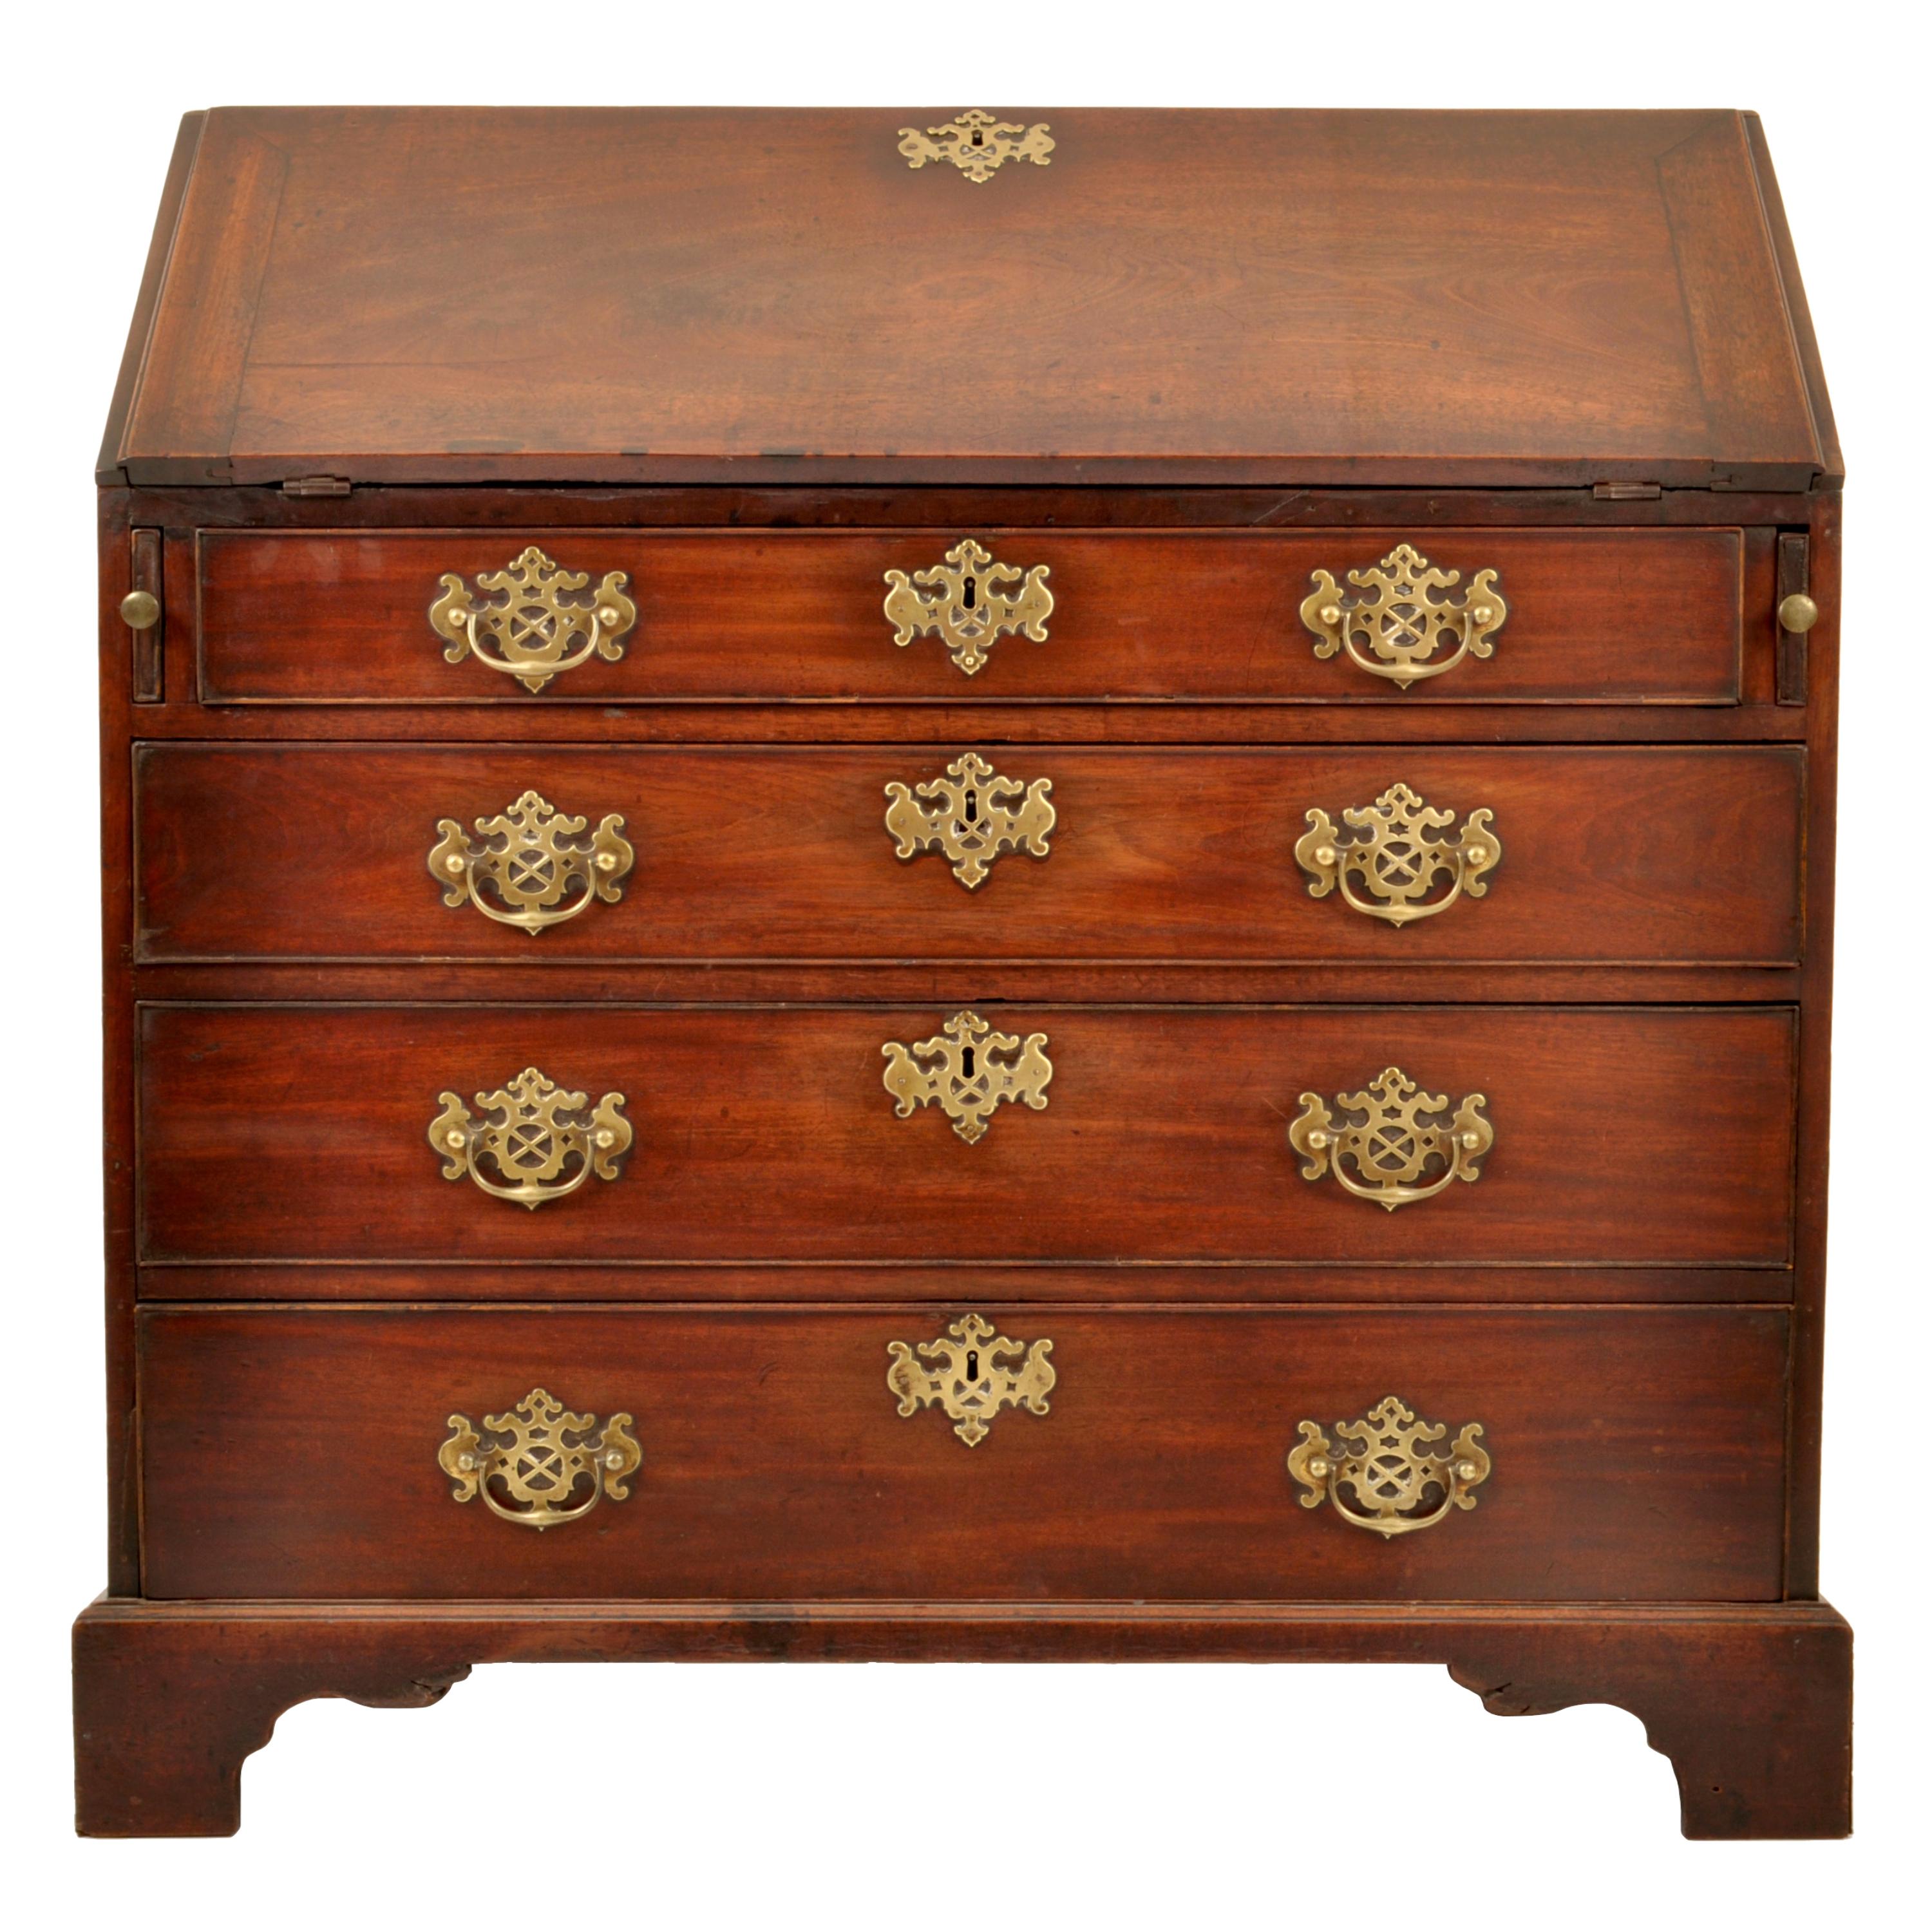 A good quality antique American George III Chippendale period bureau/desk, fall front secretary, circa 1760.
The desk having a fall front with a brass escutcheon lockplate, the hinged fall front having pull out loper supports, enclosed are seven